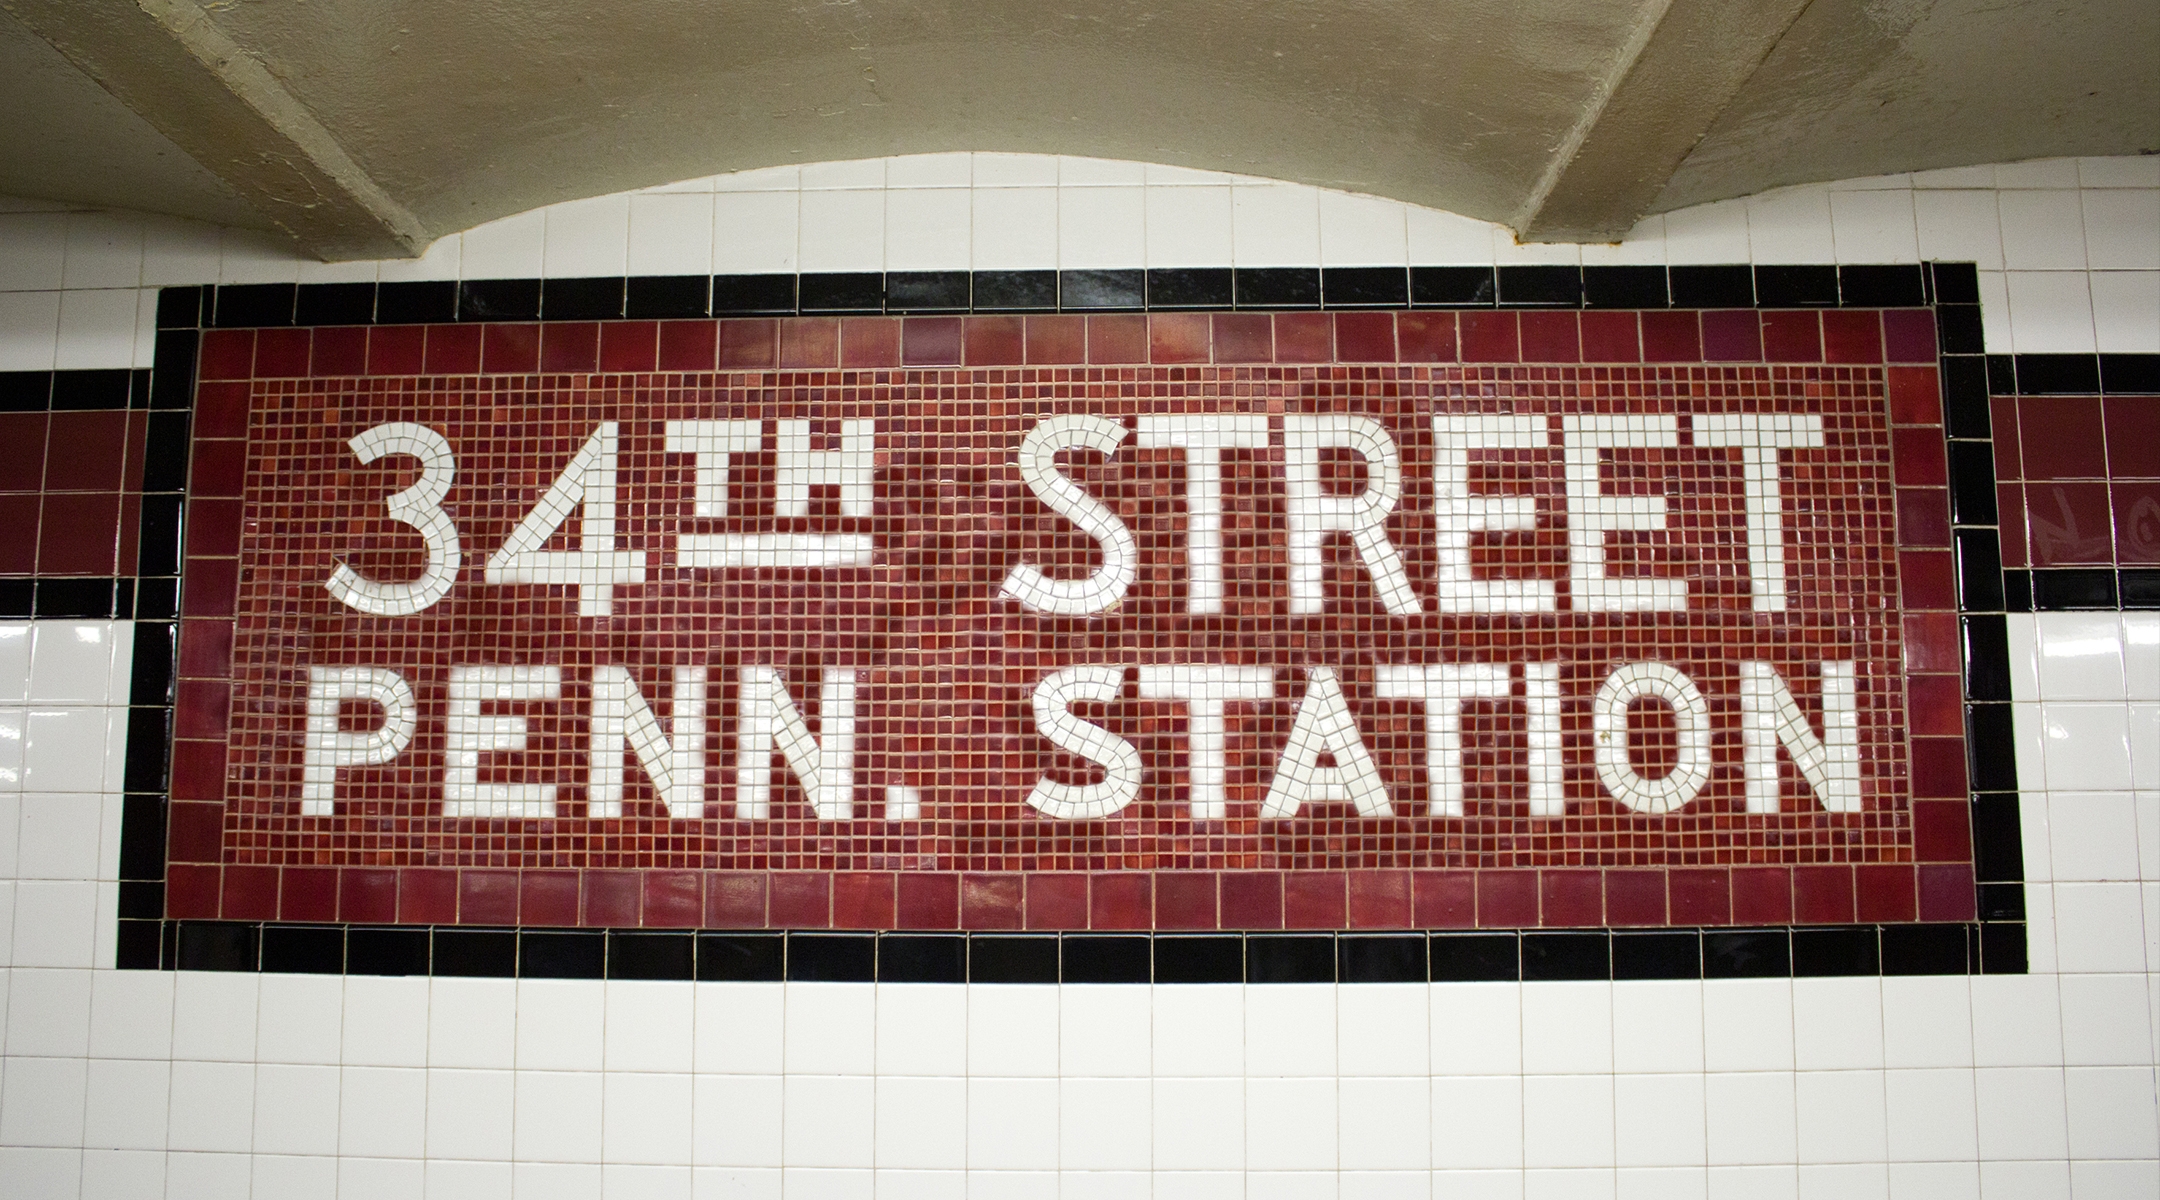 This is the subway station stop in 34th Street Penn Station, Manhattan, New York. (Getty)